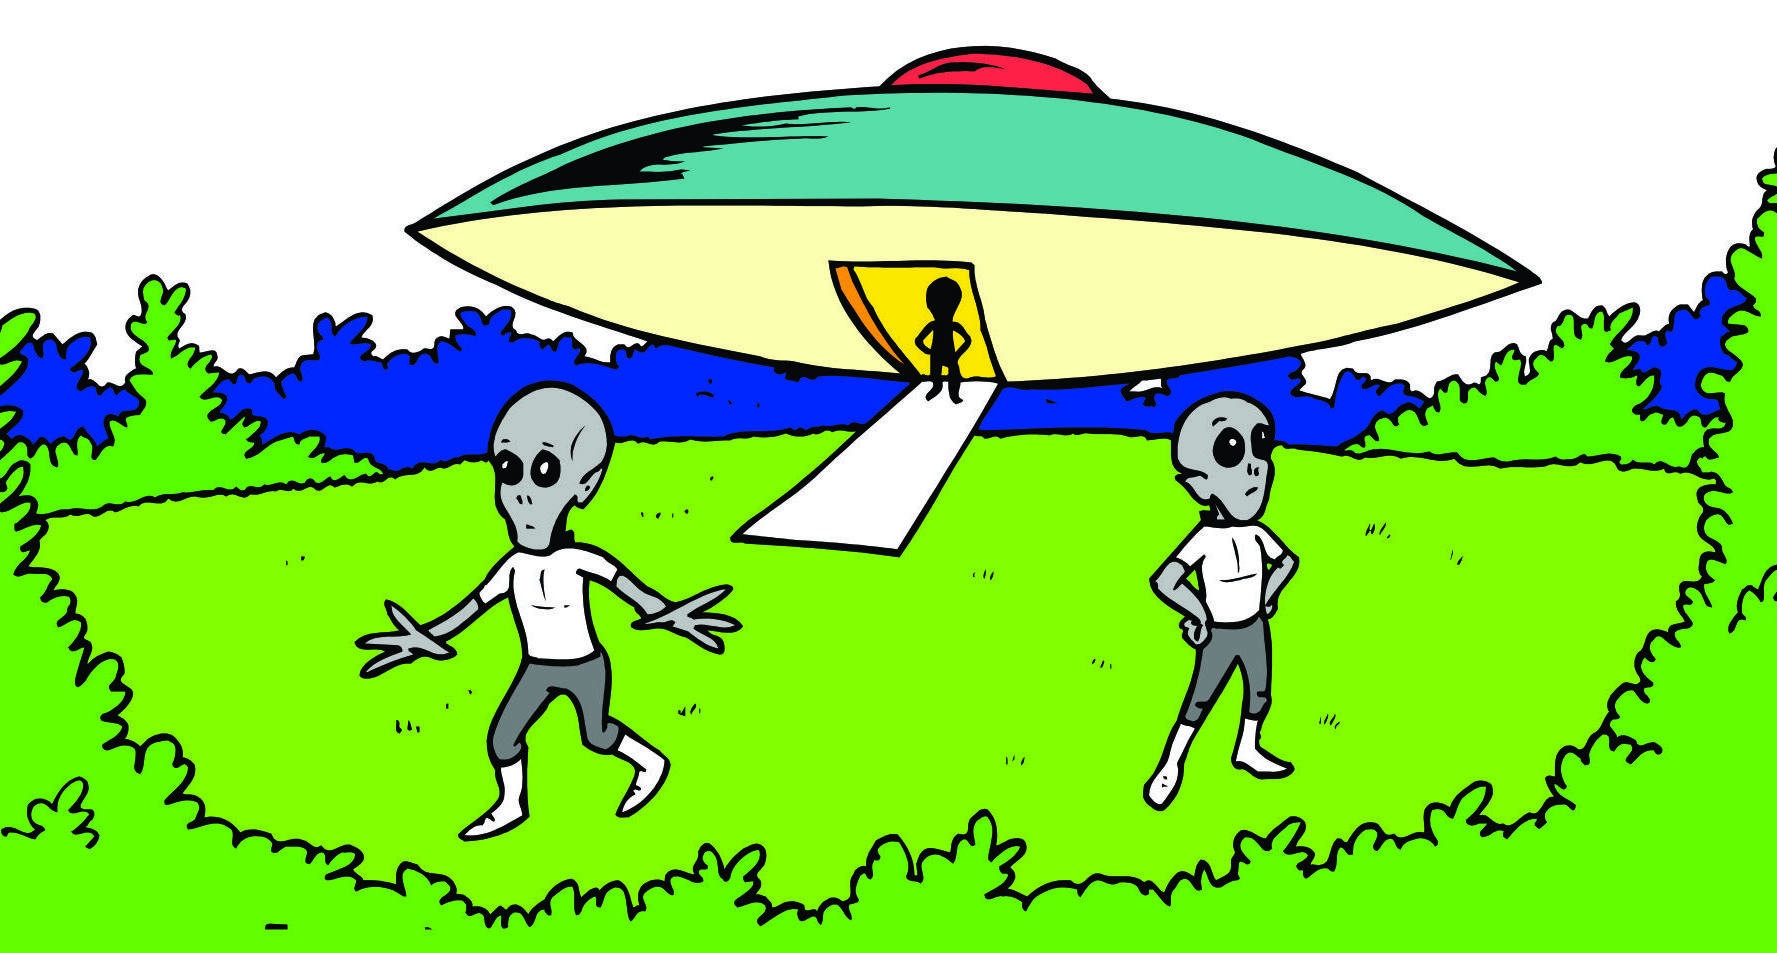 Free Images Of Space Ship, Download Free Clip Art, Free Clip Art on